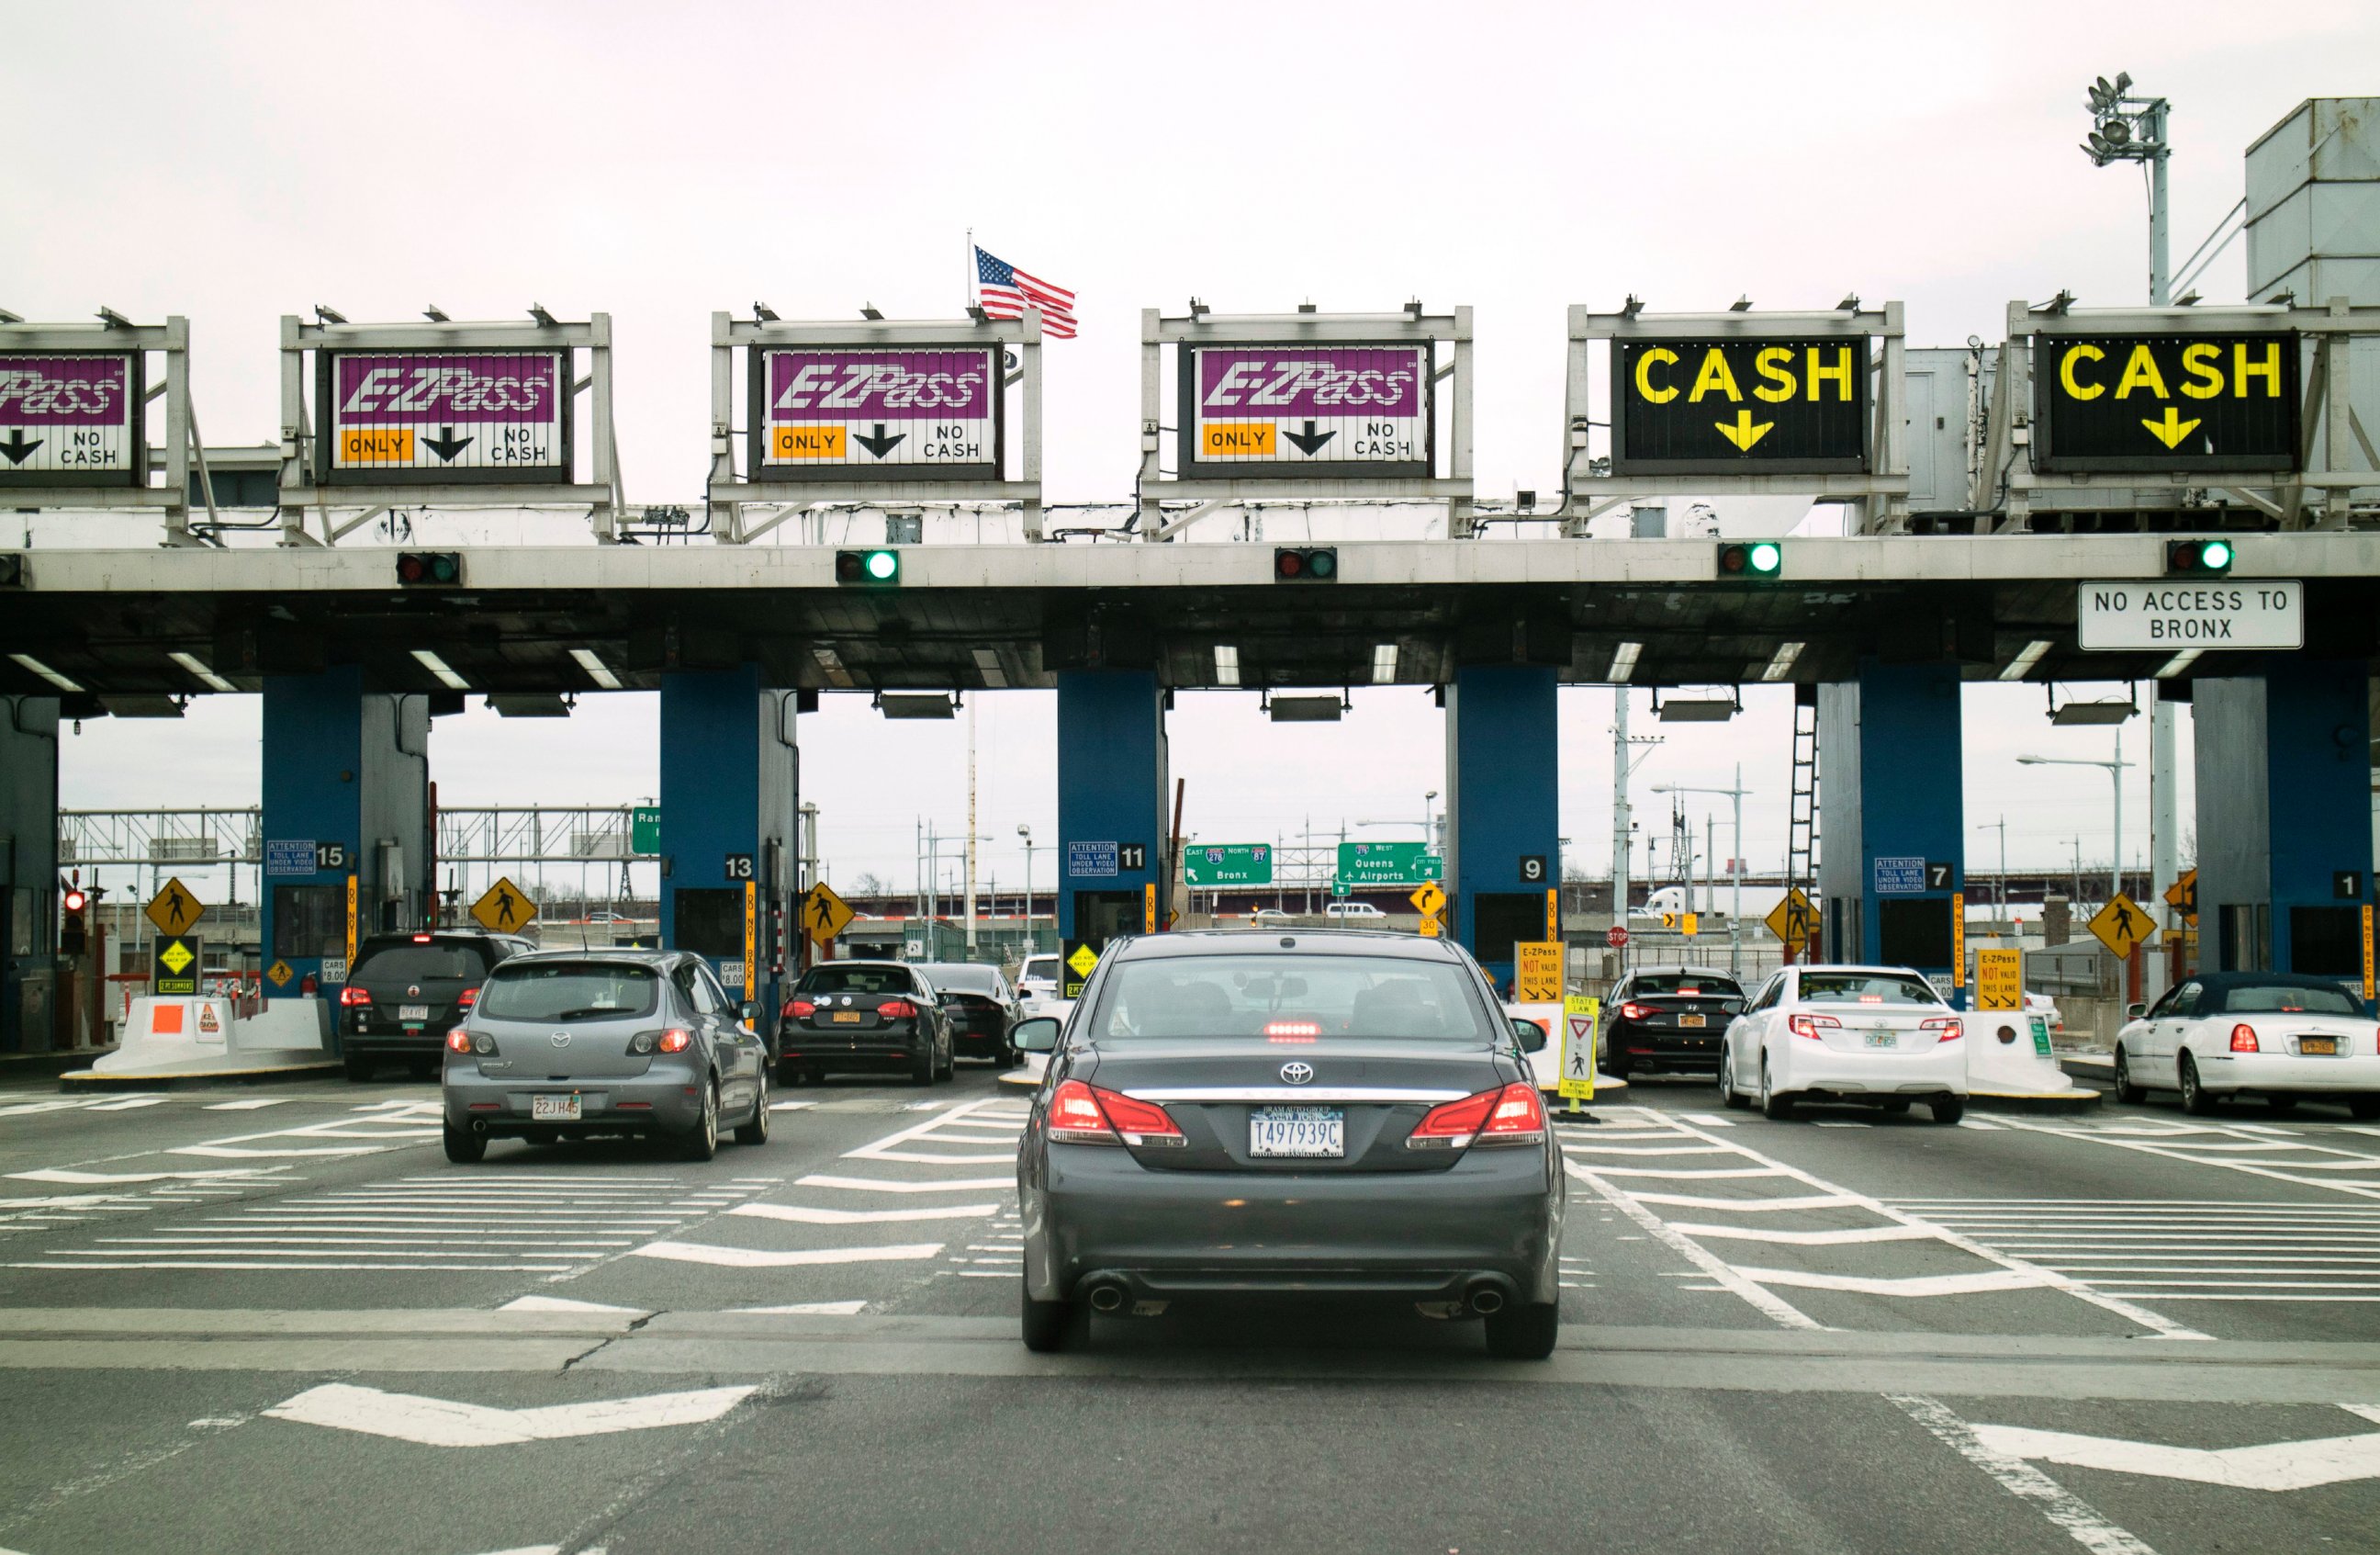 PHOTO: Cars queue at a toll plaza on the Robert F. Kennedy bridge in New York.